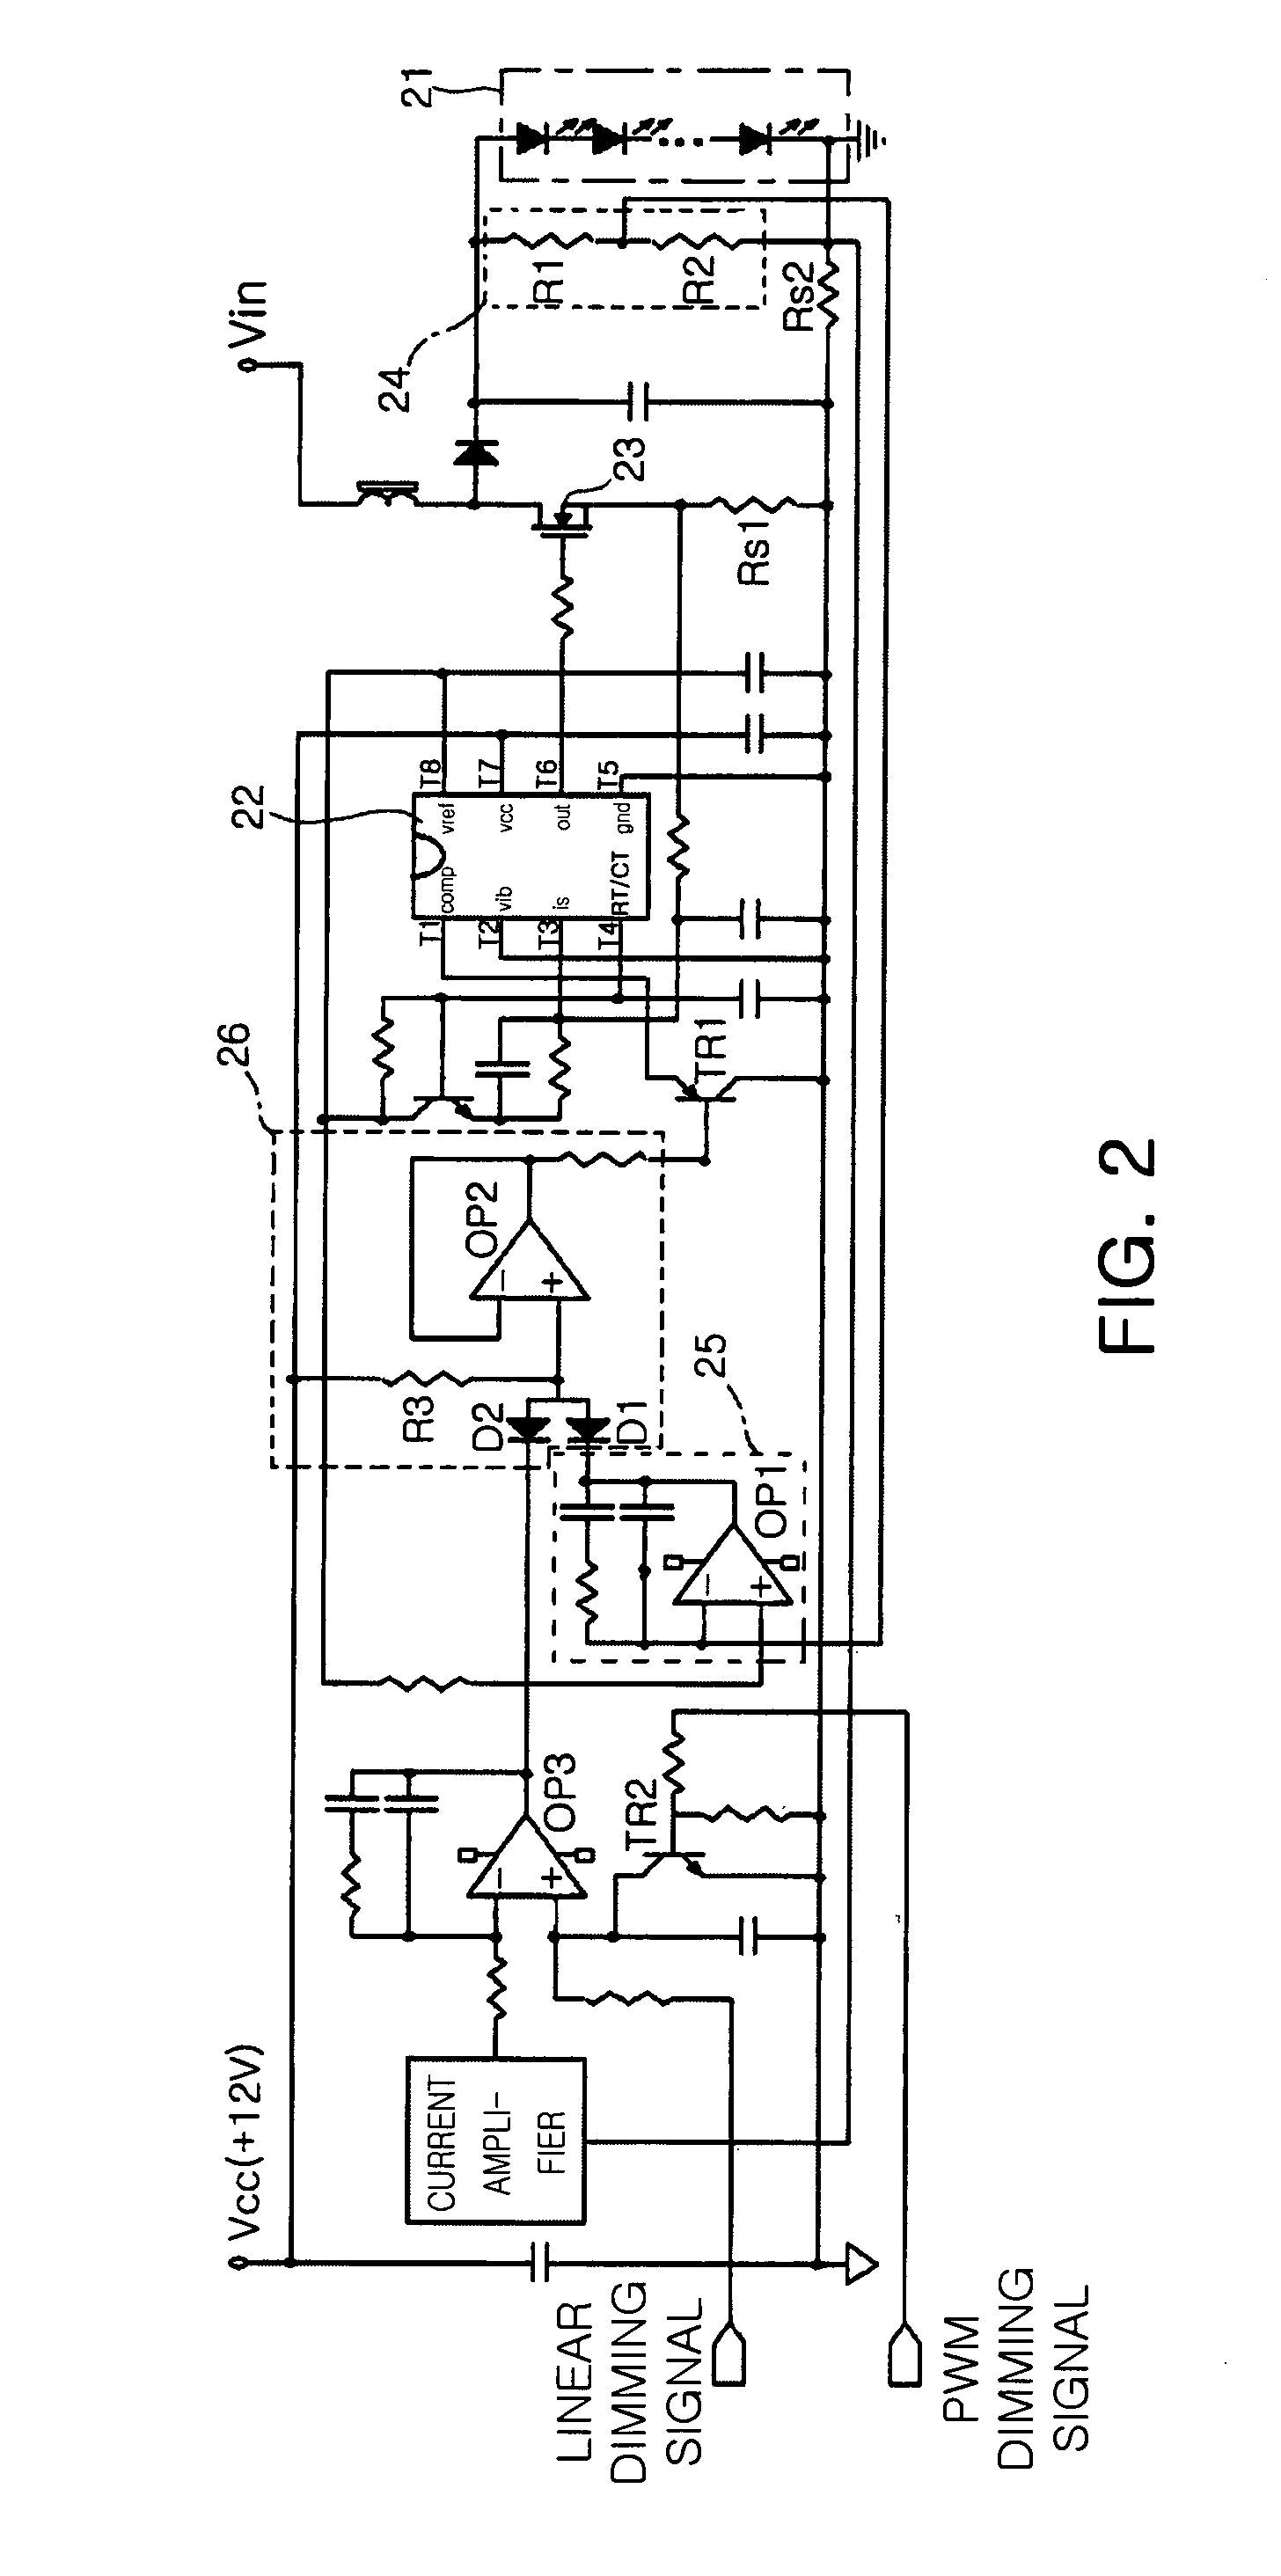 LED driving device of overvoltage protection and duty control